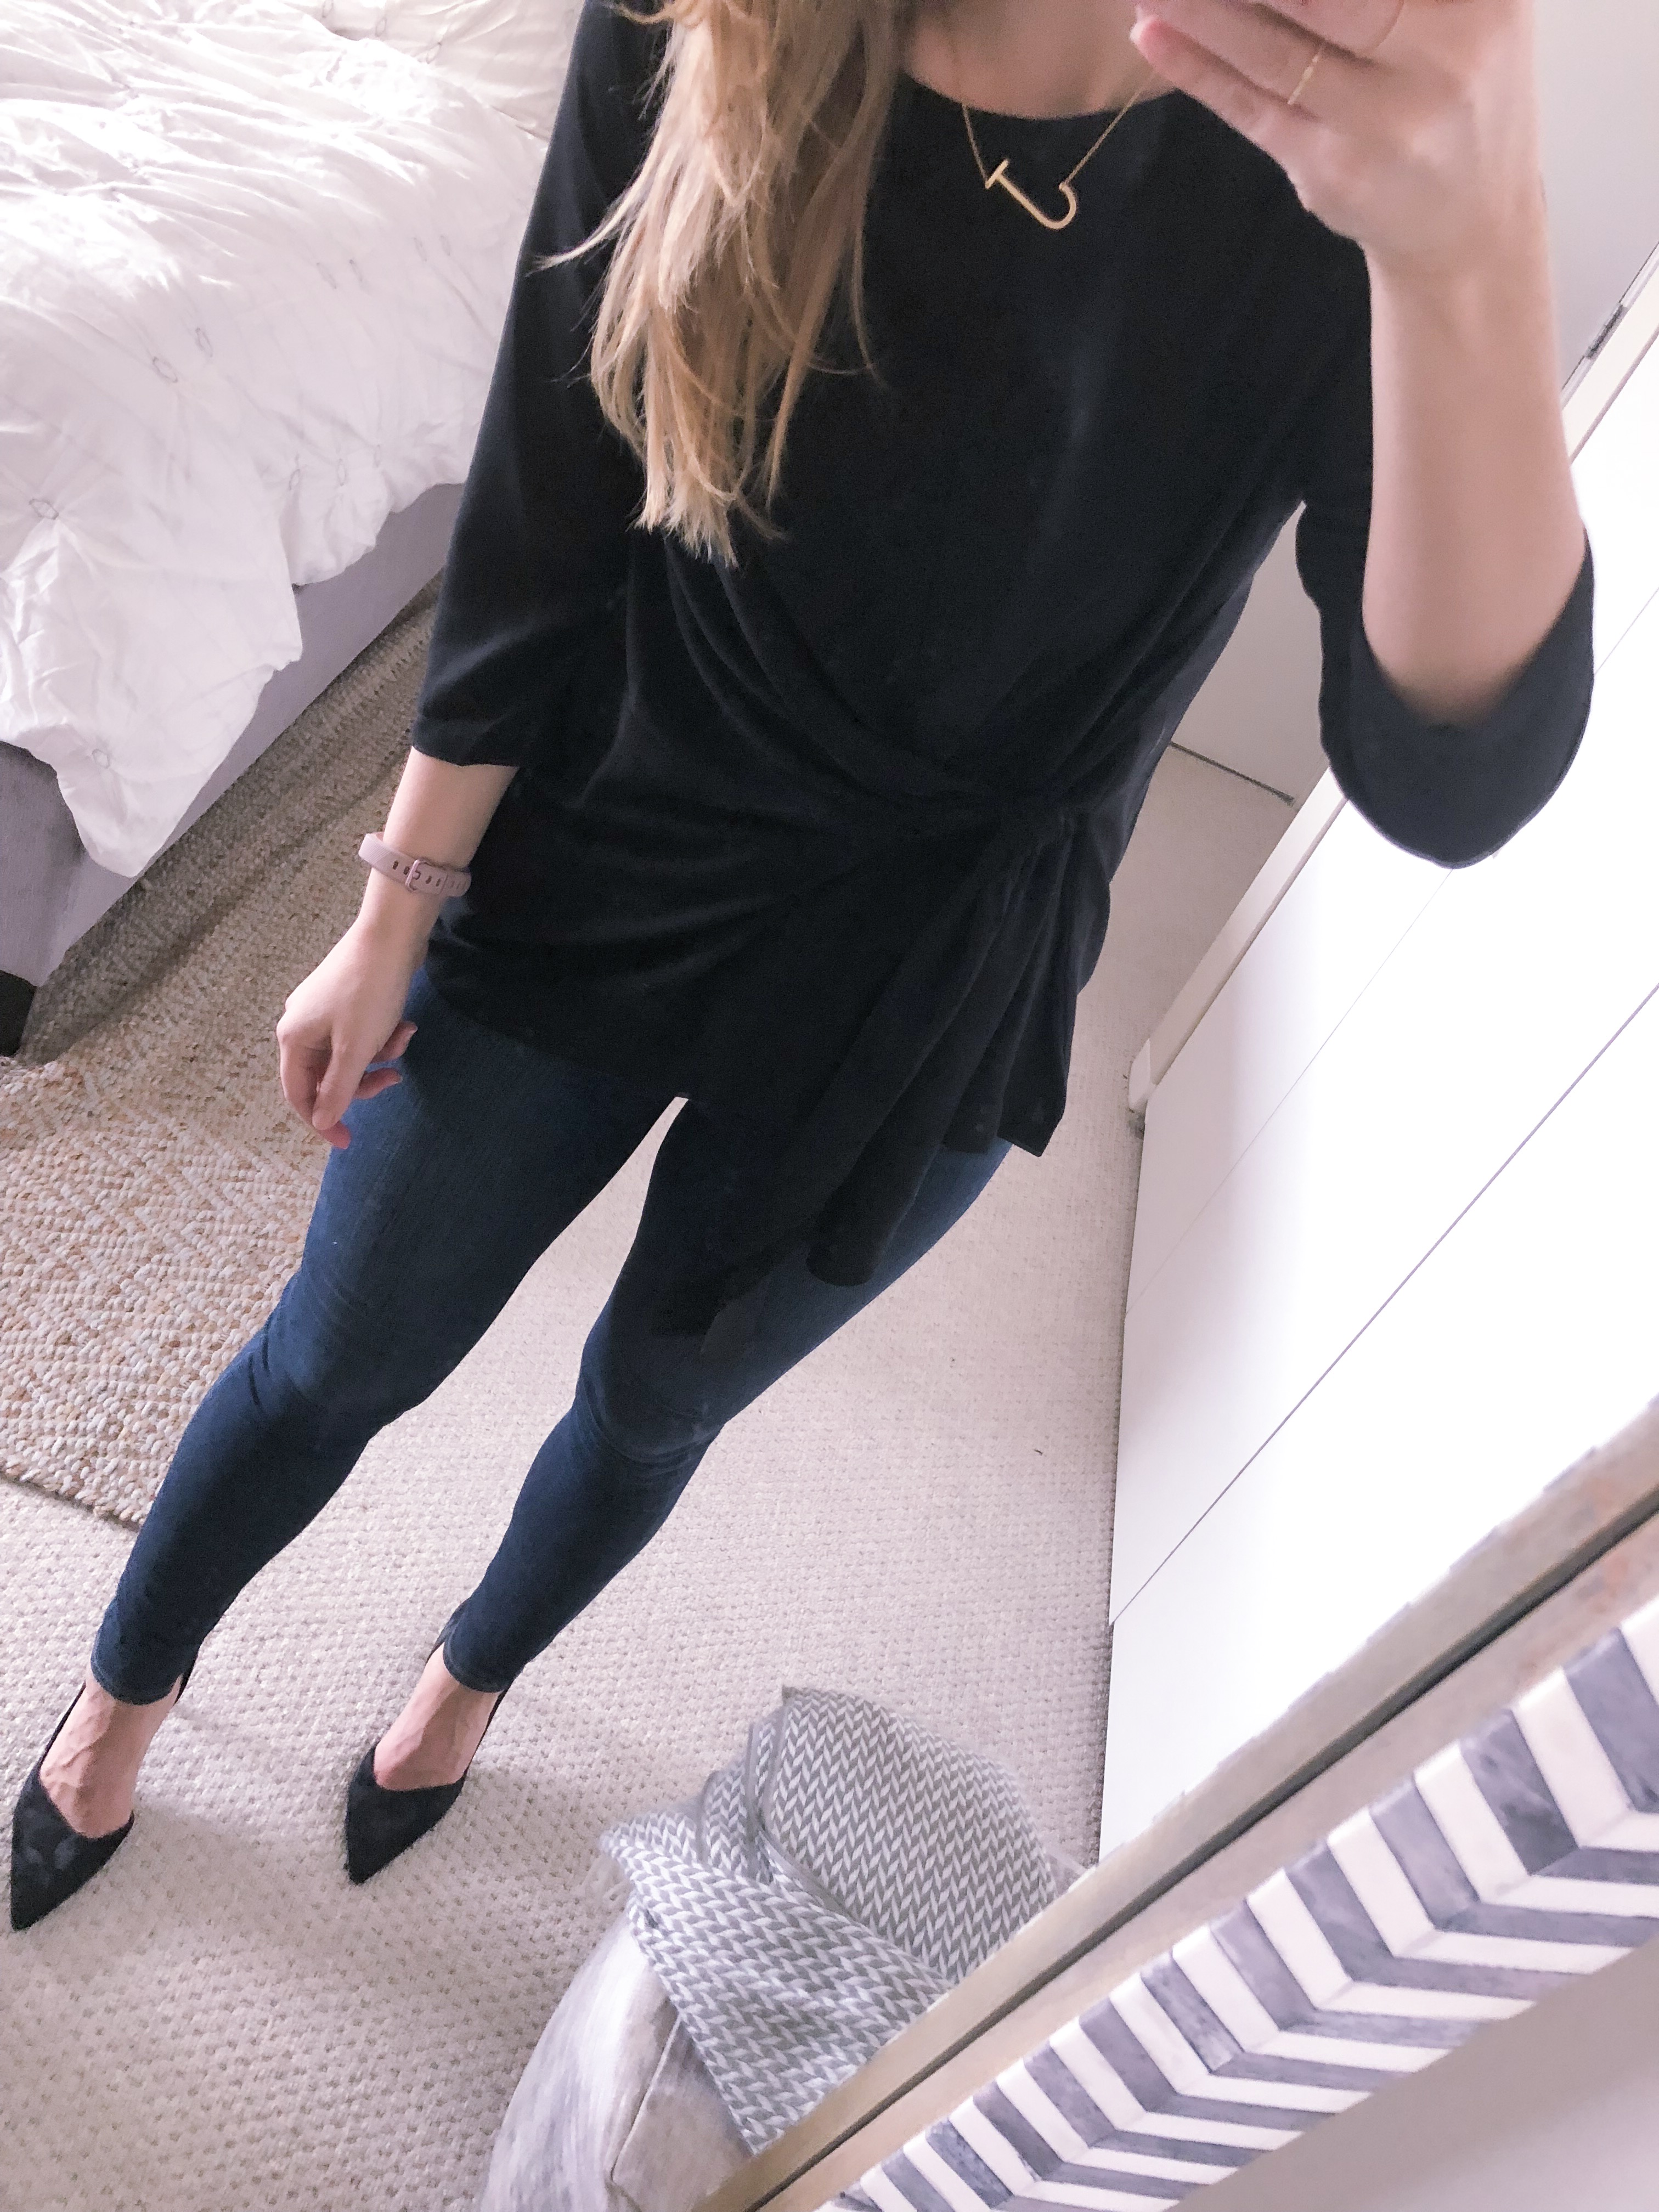 chicago blogger shares a black work top that is a workwear essential